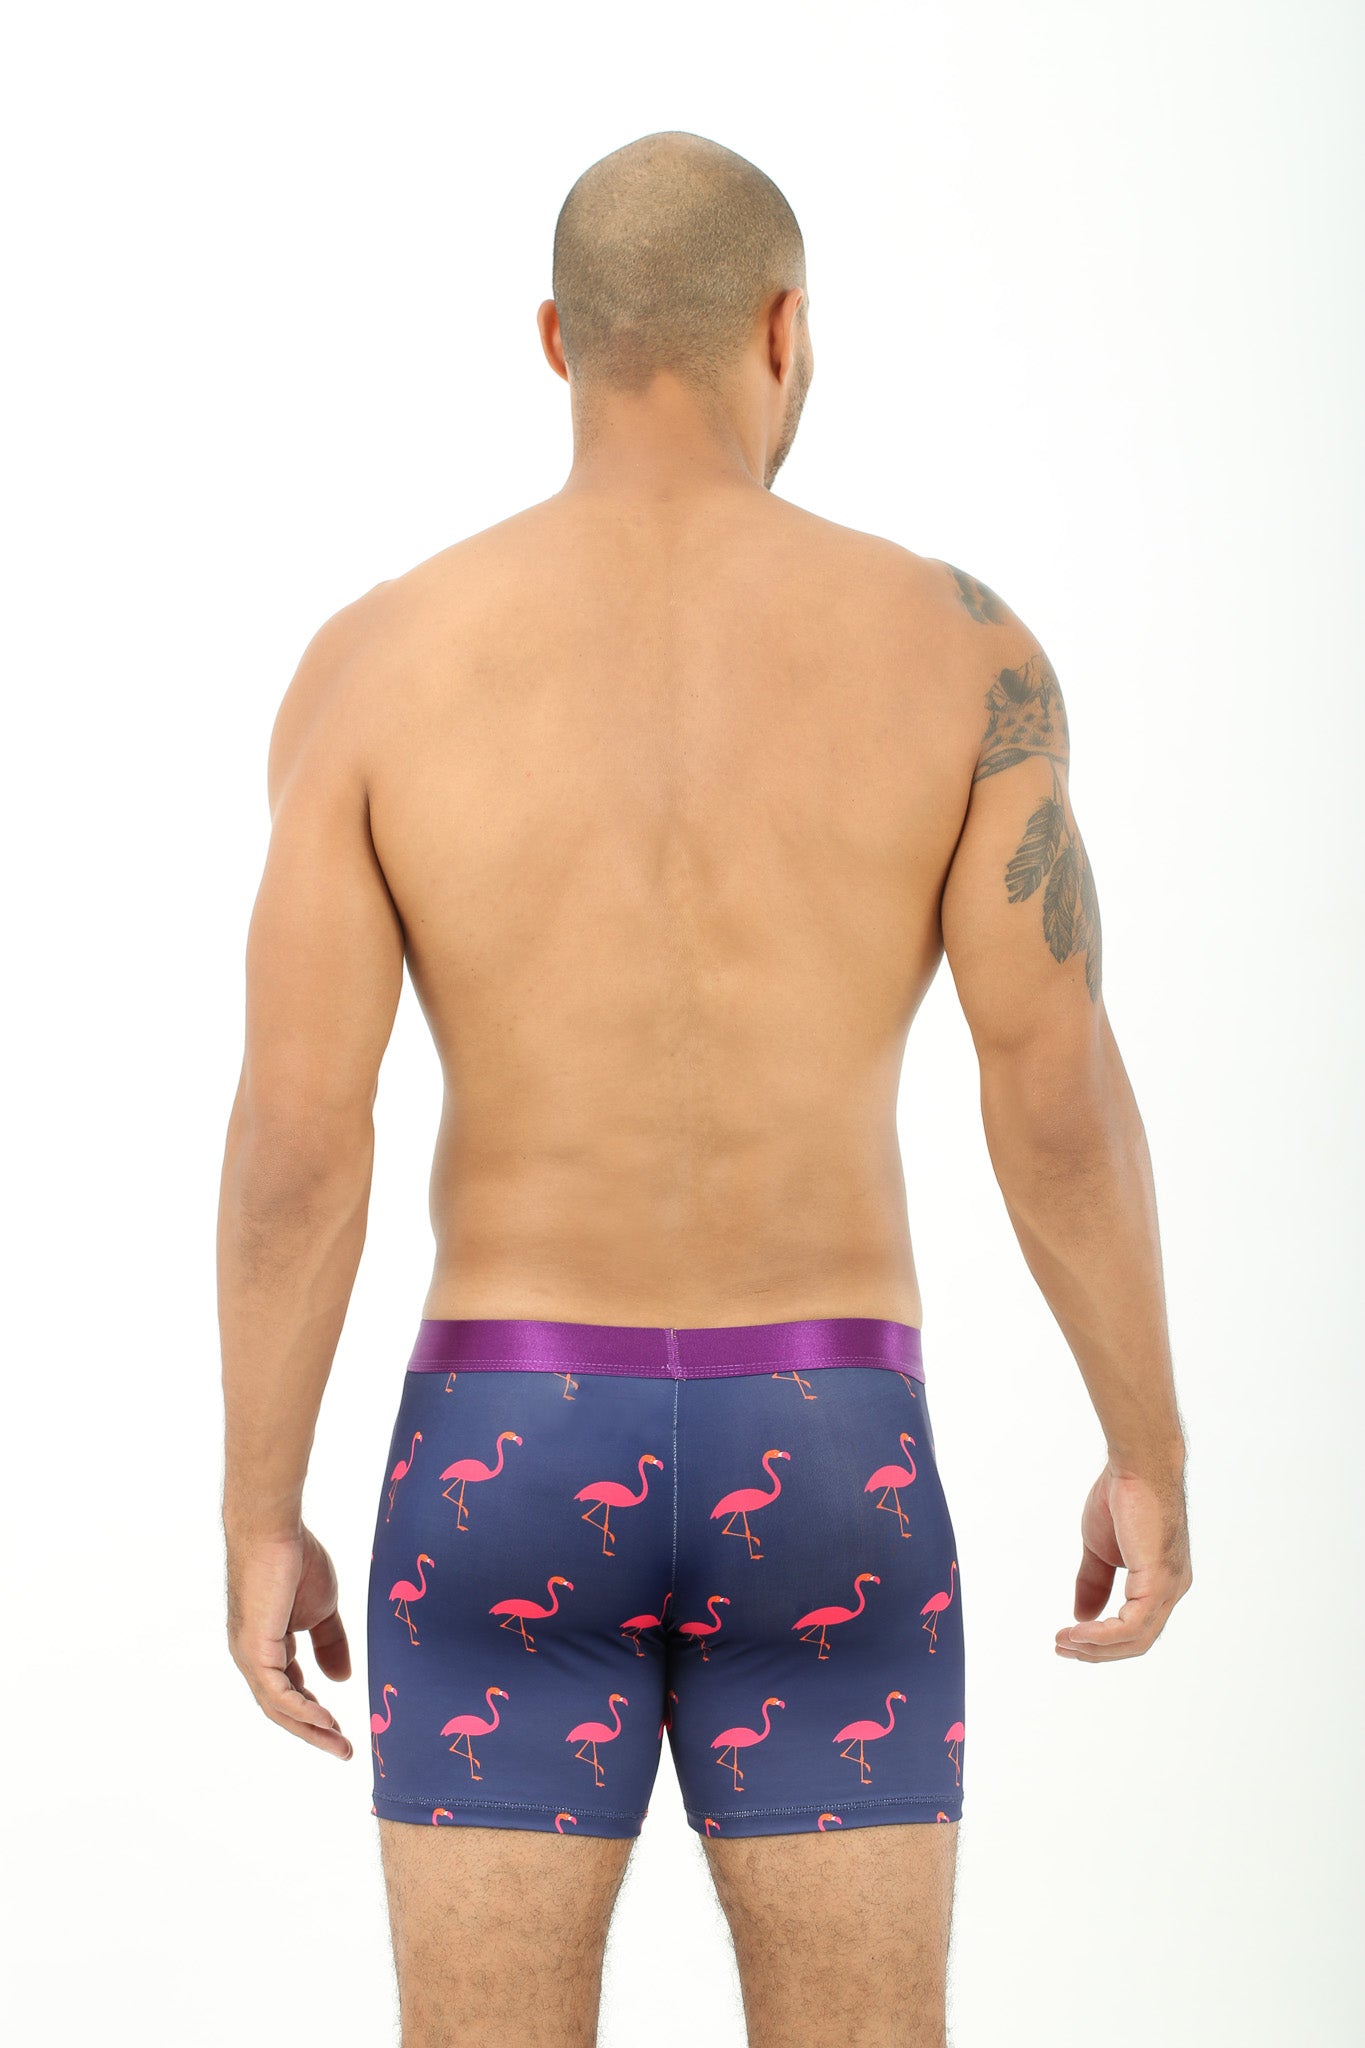 A man viewed from behind, wearing Pink Flamingo Underwear, showing a tattoo on his left shoulder as he strides forward with tropical vibes.